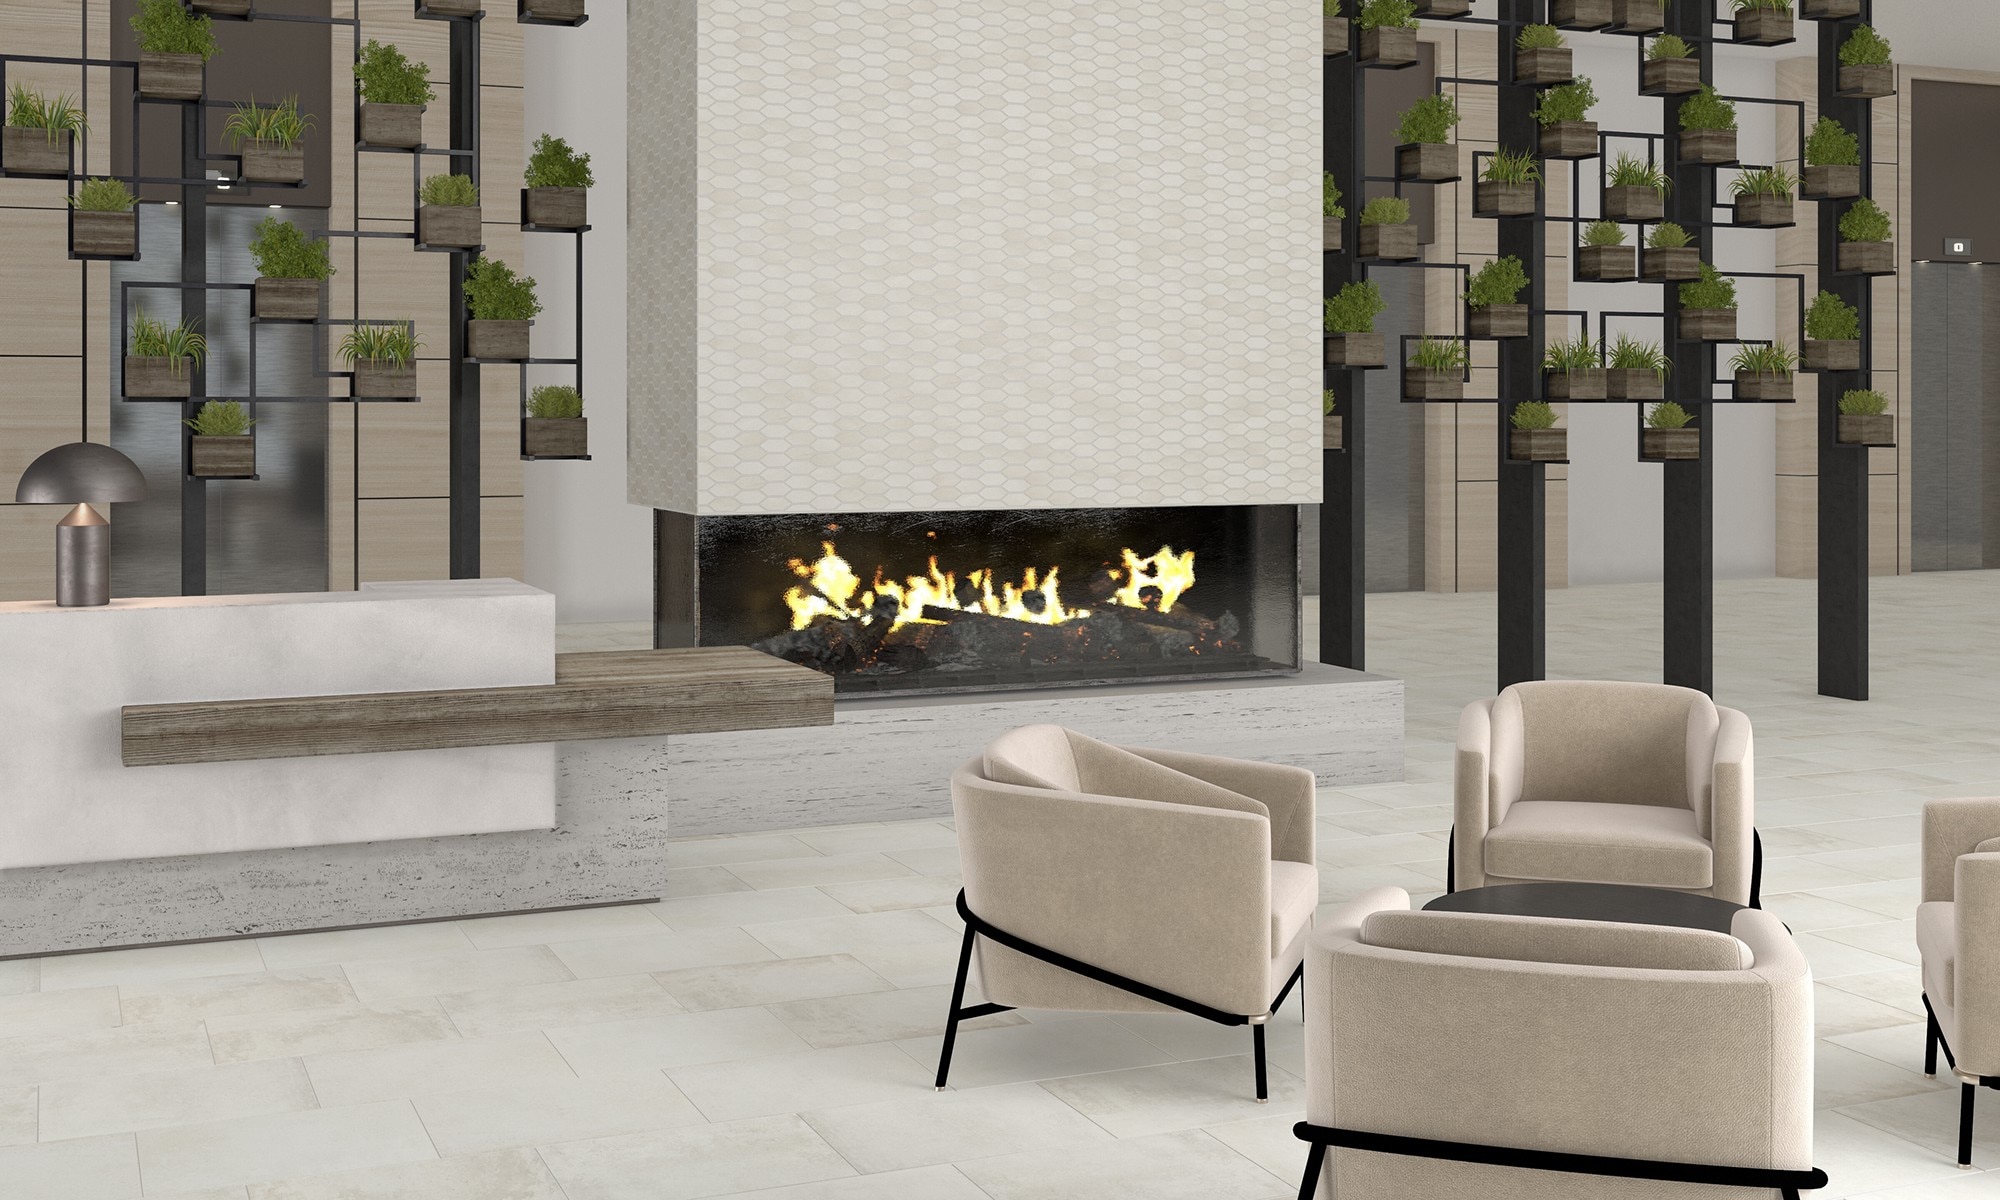 Hotel lobby with cream-colored floor tile, fireplace with cream-colored mosaic tile, iron beams with small planters, and beige suede chairs around a coffee table. 